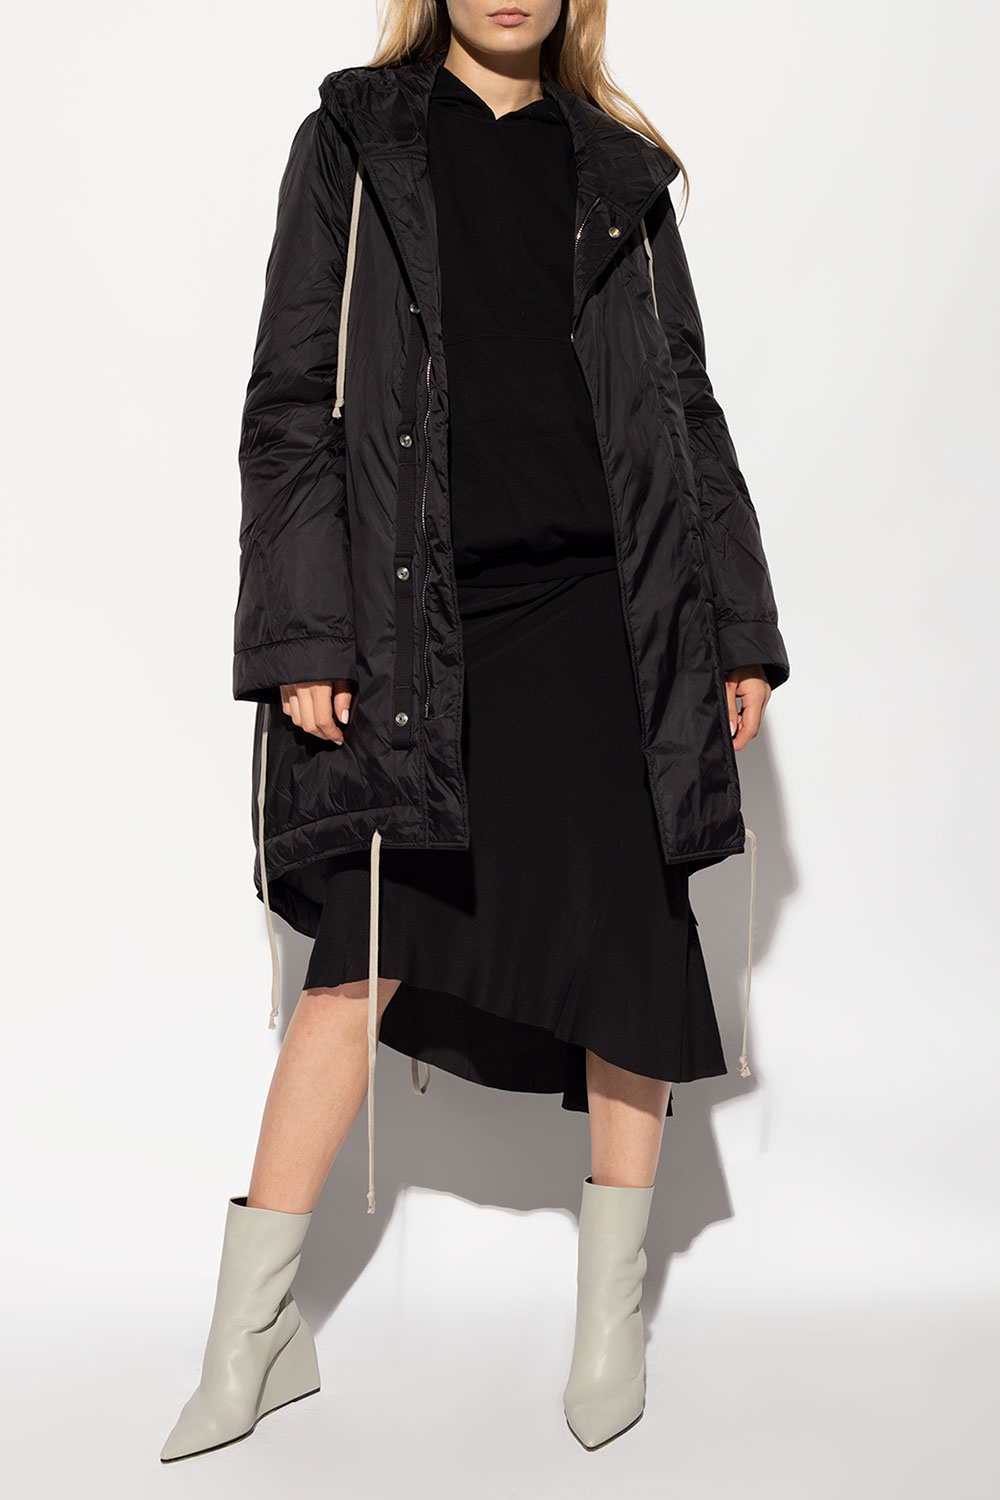 Frequently asked questions Hooded coat